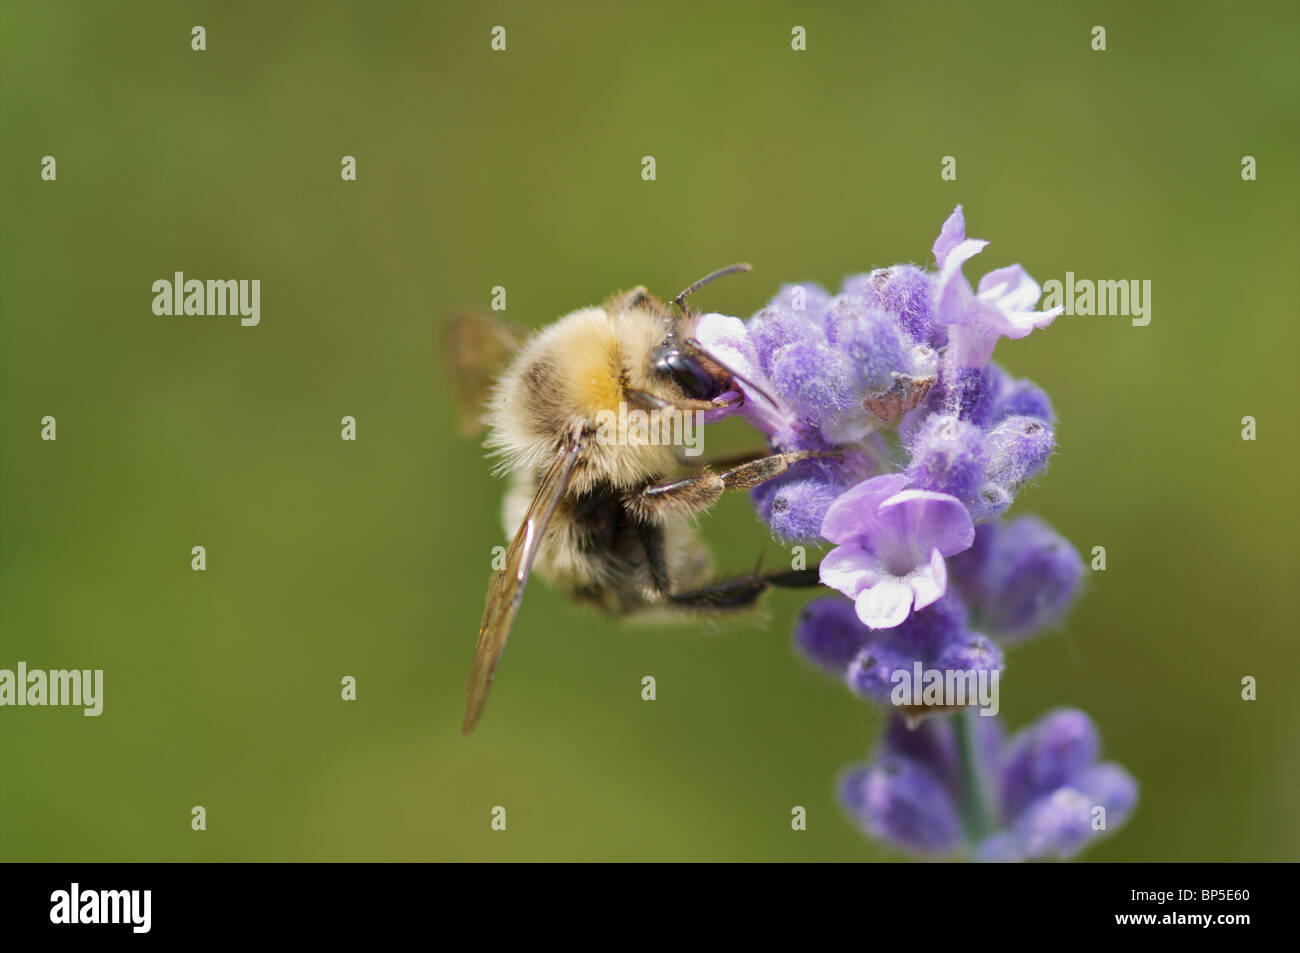 Close up of a Common Carder Bumblebee on English Lavender plant (lavandula angustifolia) Stock Photo